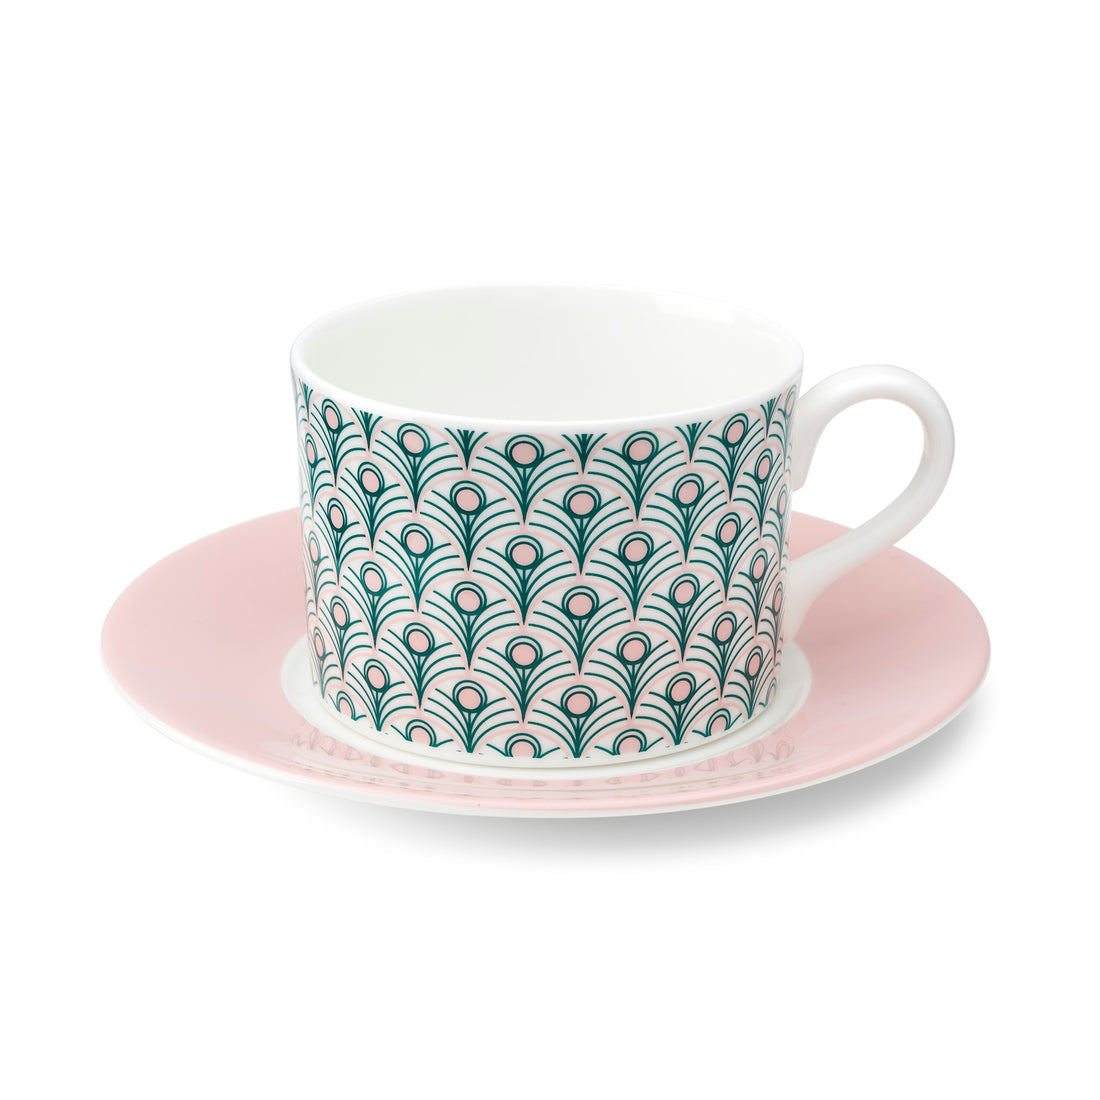 Peacock Cup & Saucer in Teal & Blush Pink [Blush Saucer]